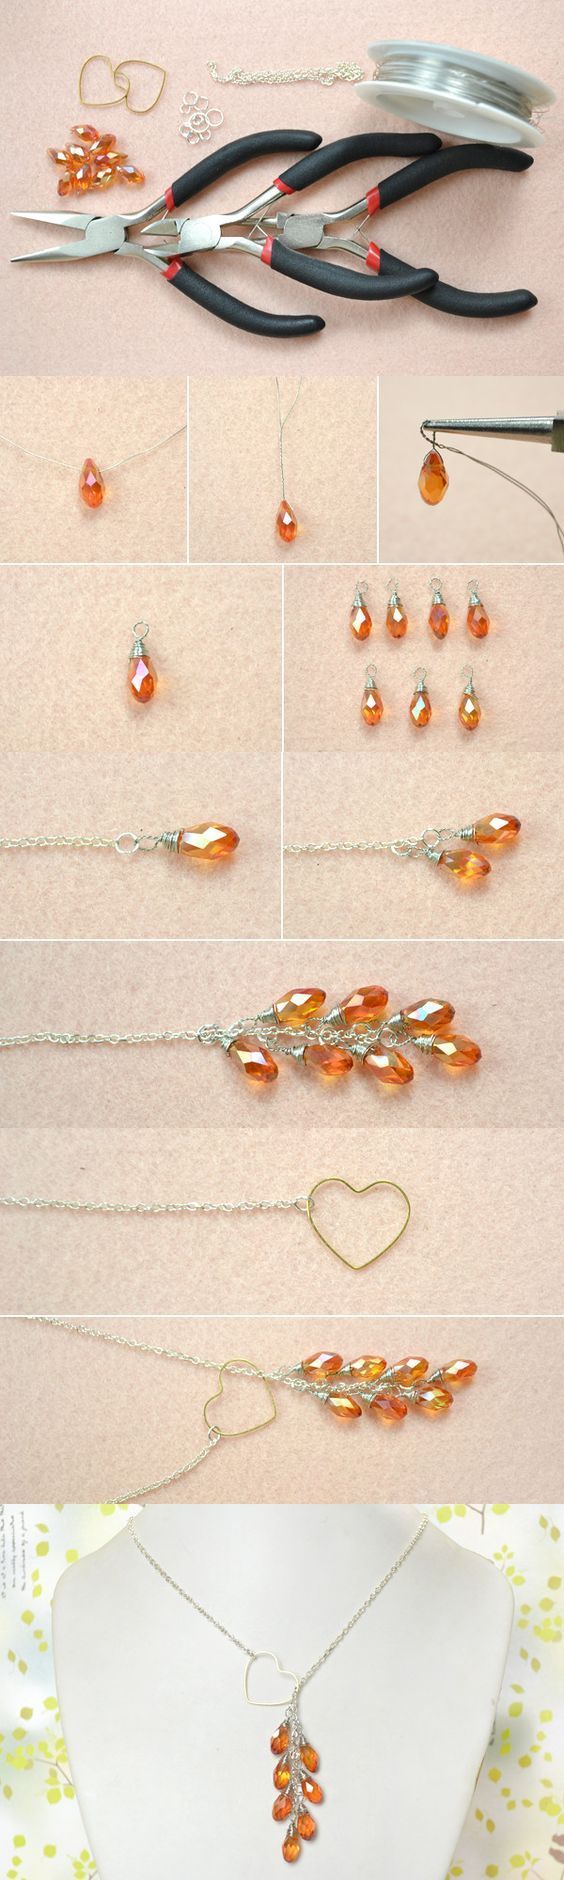 Easy DIY Tutorial on How to Make a Heart Lariat Style Necklace from LC.Pandahall.com